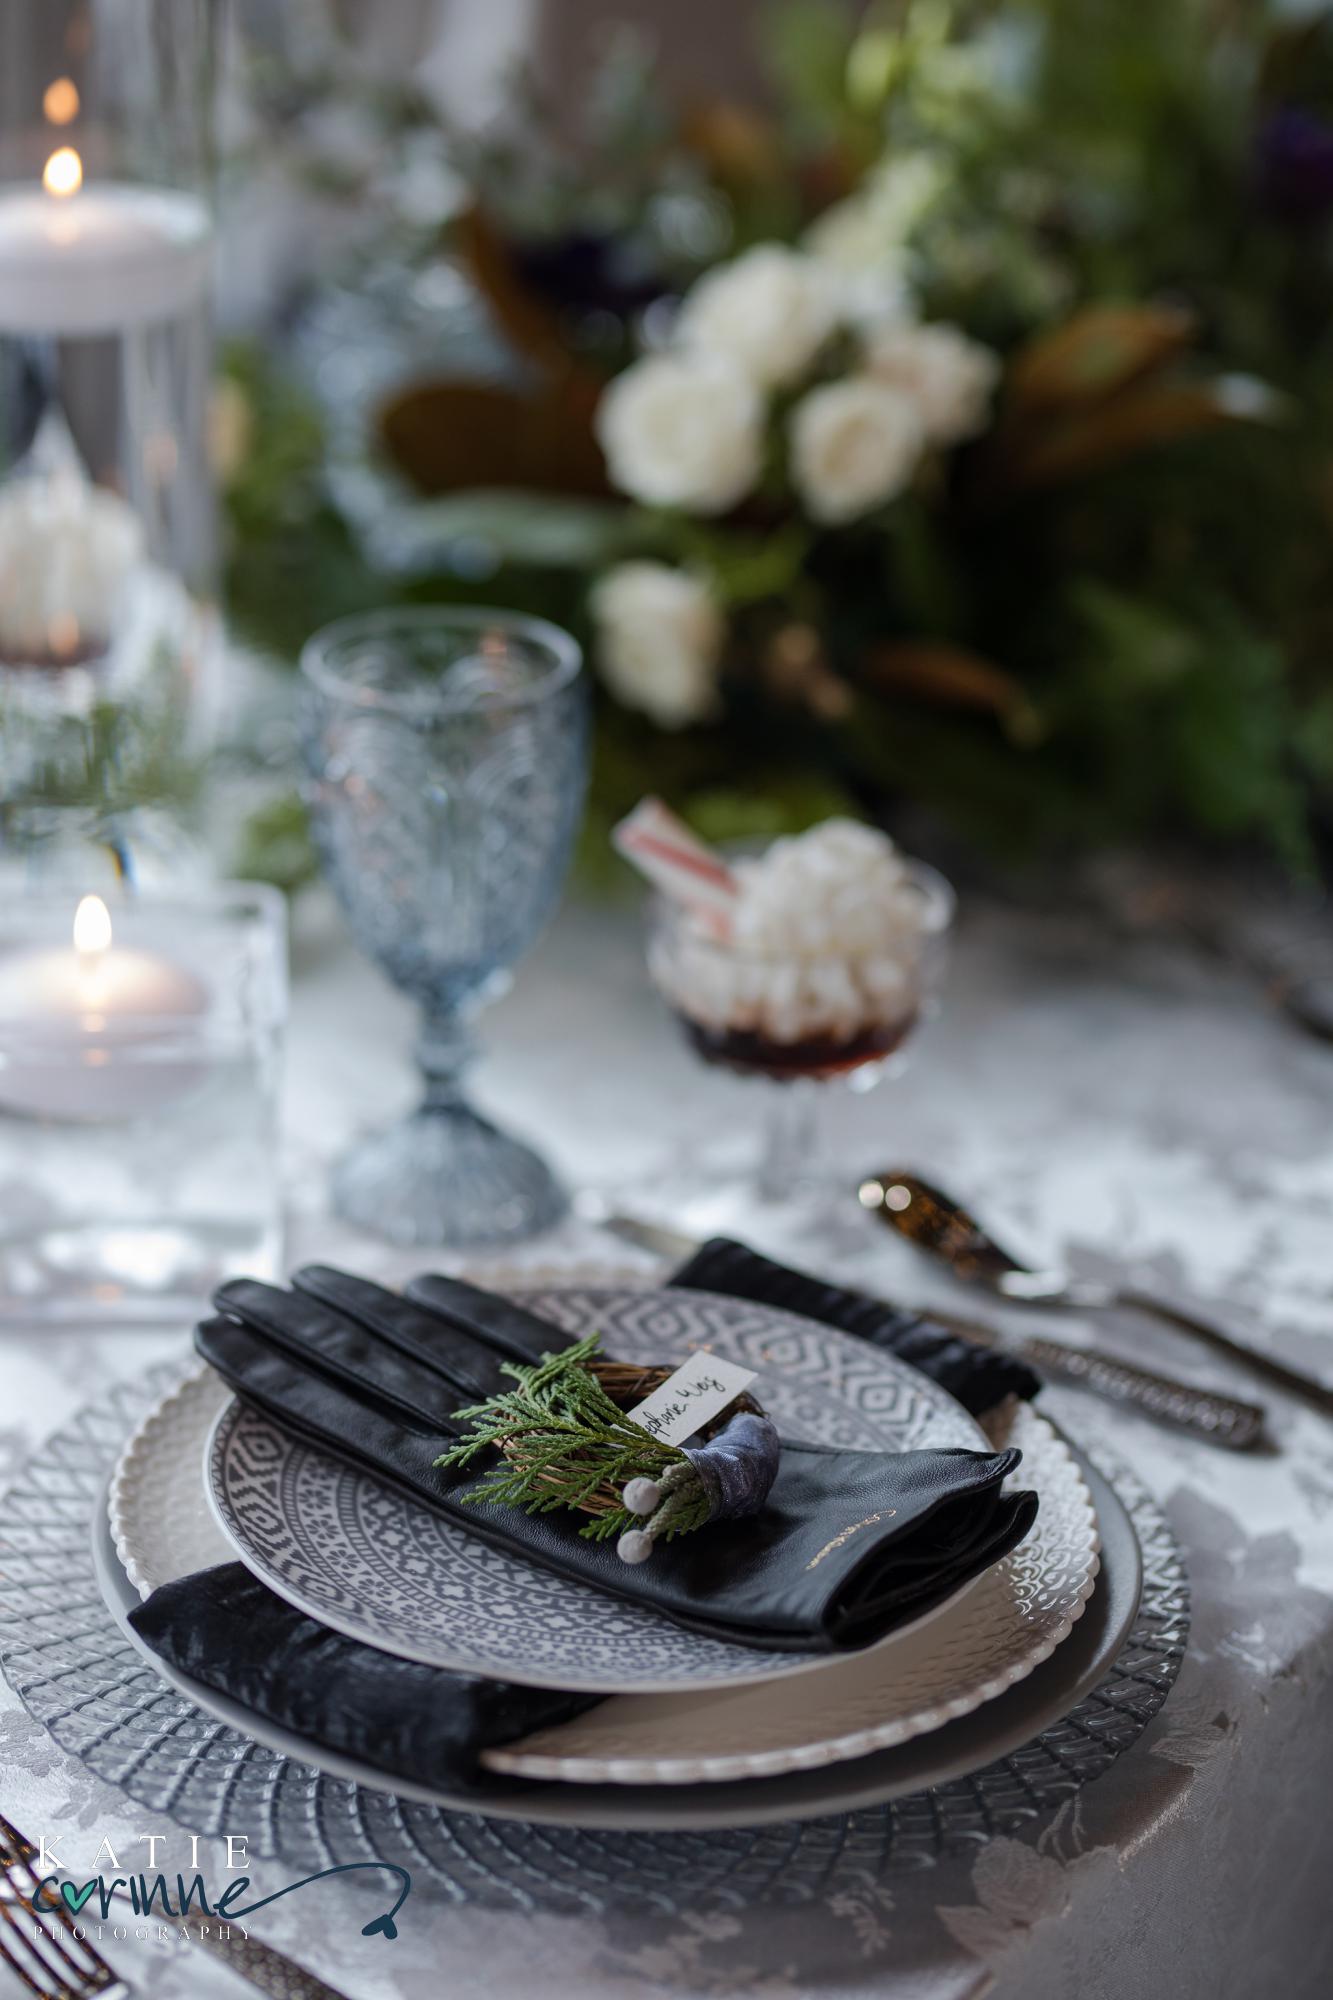 Gloves sit on top of place setting with tiny wreath placecard